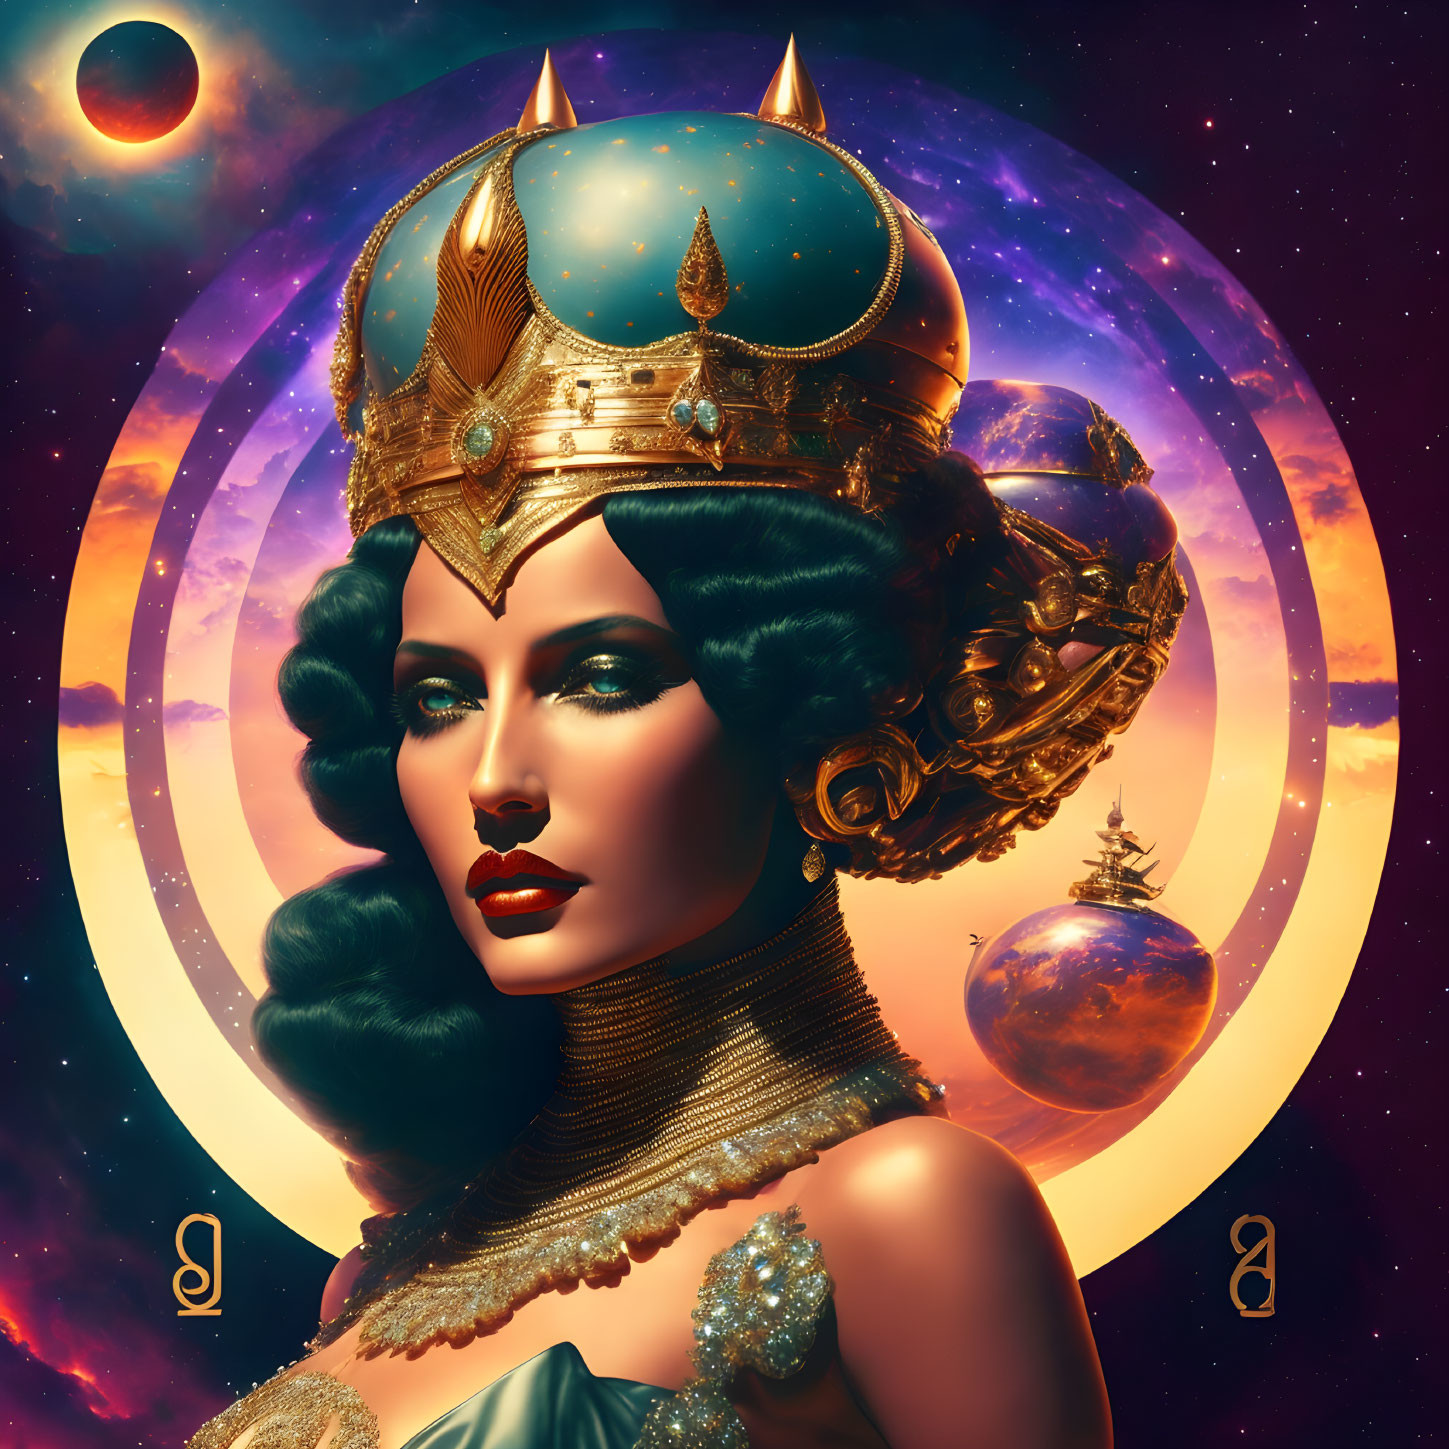 Regal Woman with Golden Crown in Cosmic Setting